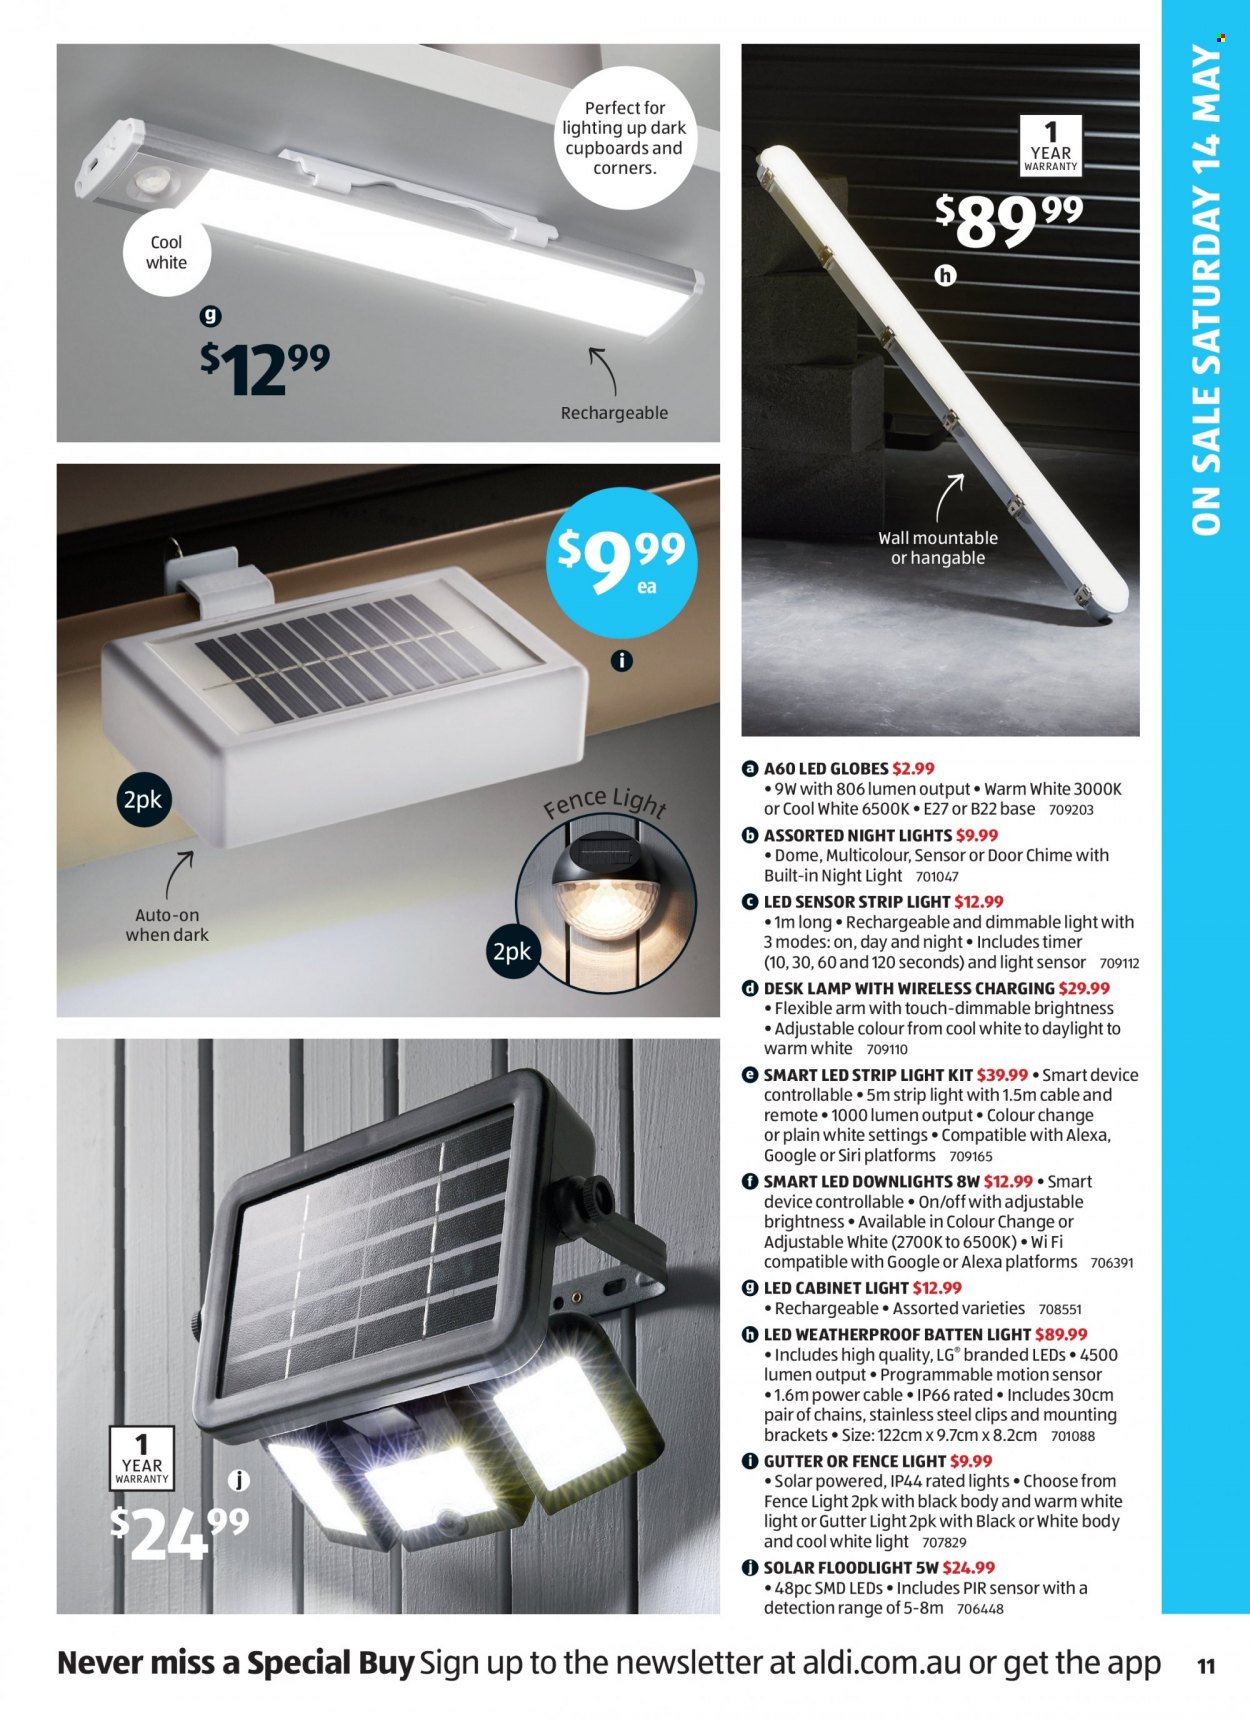 ALDI Catalogue - 12 May 2022 - 18 May 2022 - Sales products - LG, motion sensor, cabinet, lamp, LED strip, lighting, floodlight. Page 11.